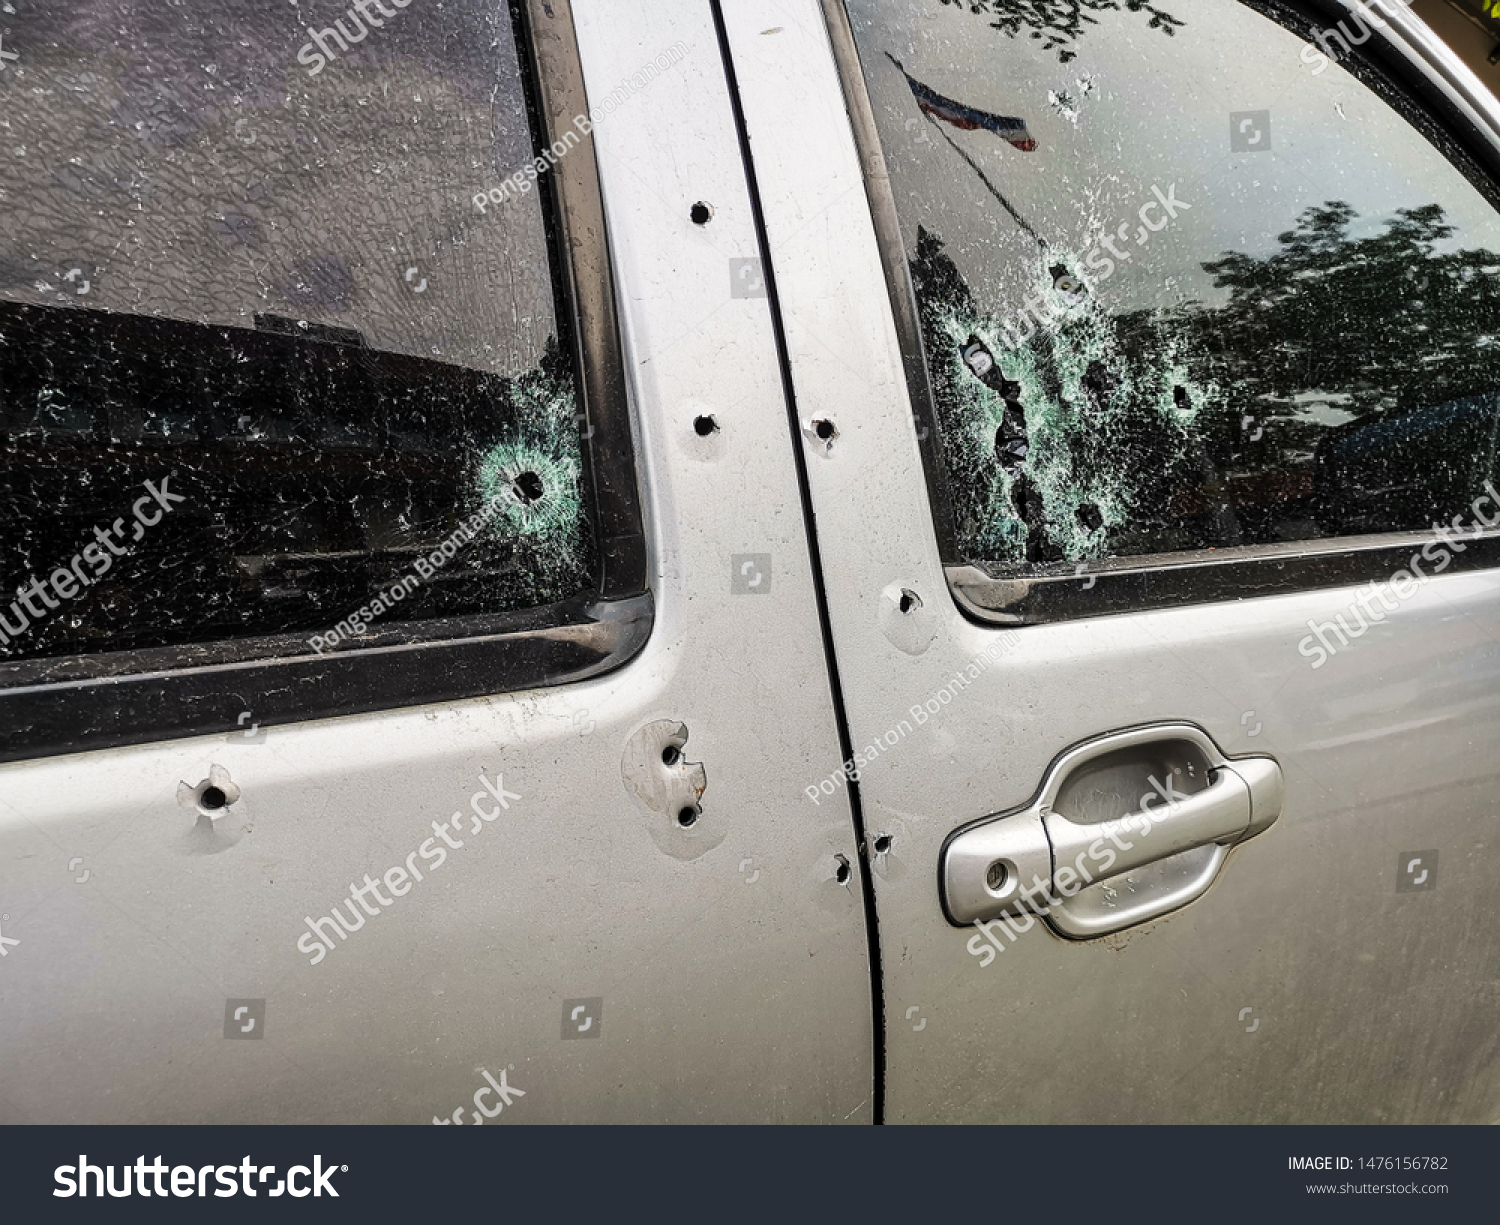 Car riddled with bullet holes . #1476156782